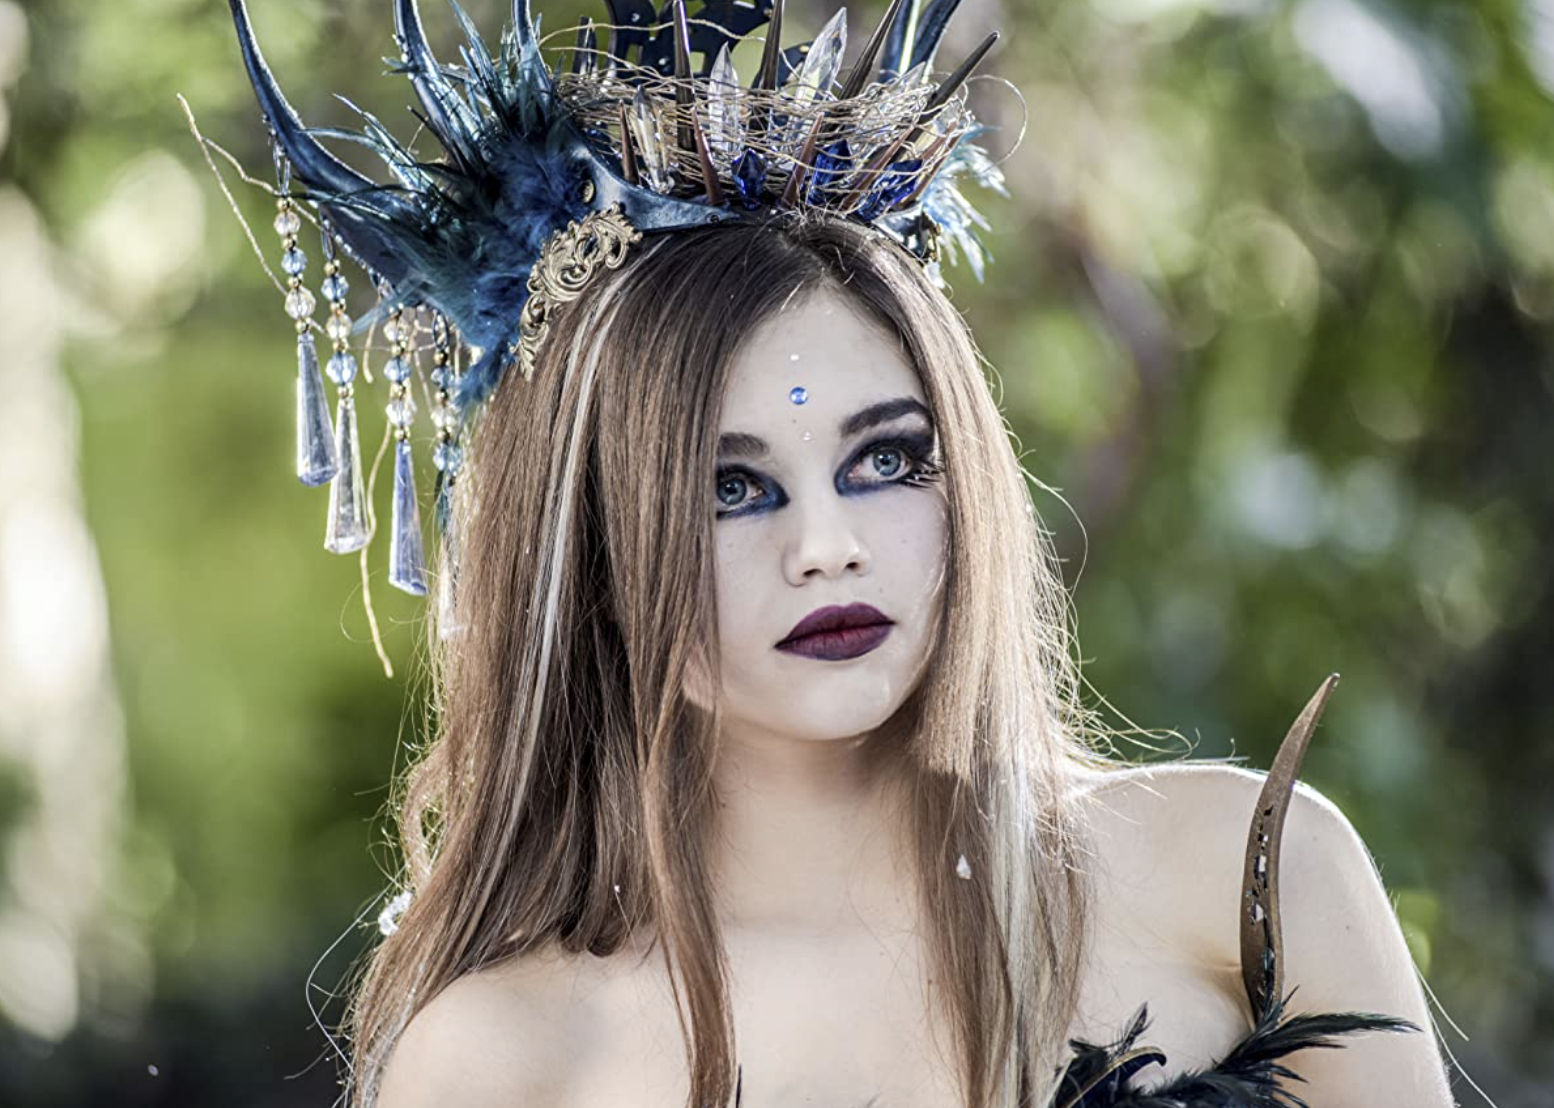 India Eisley in "The Curse of Sleeping Beauty"